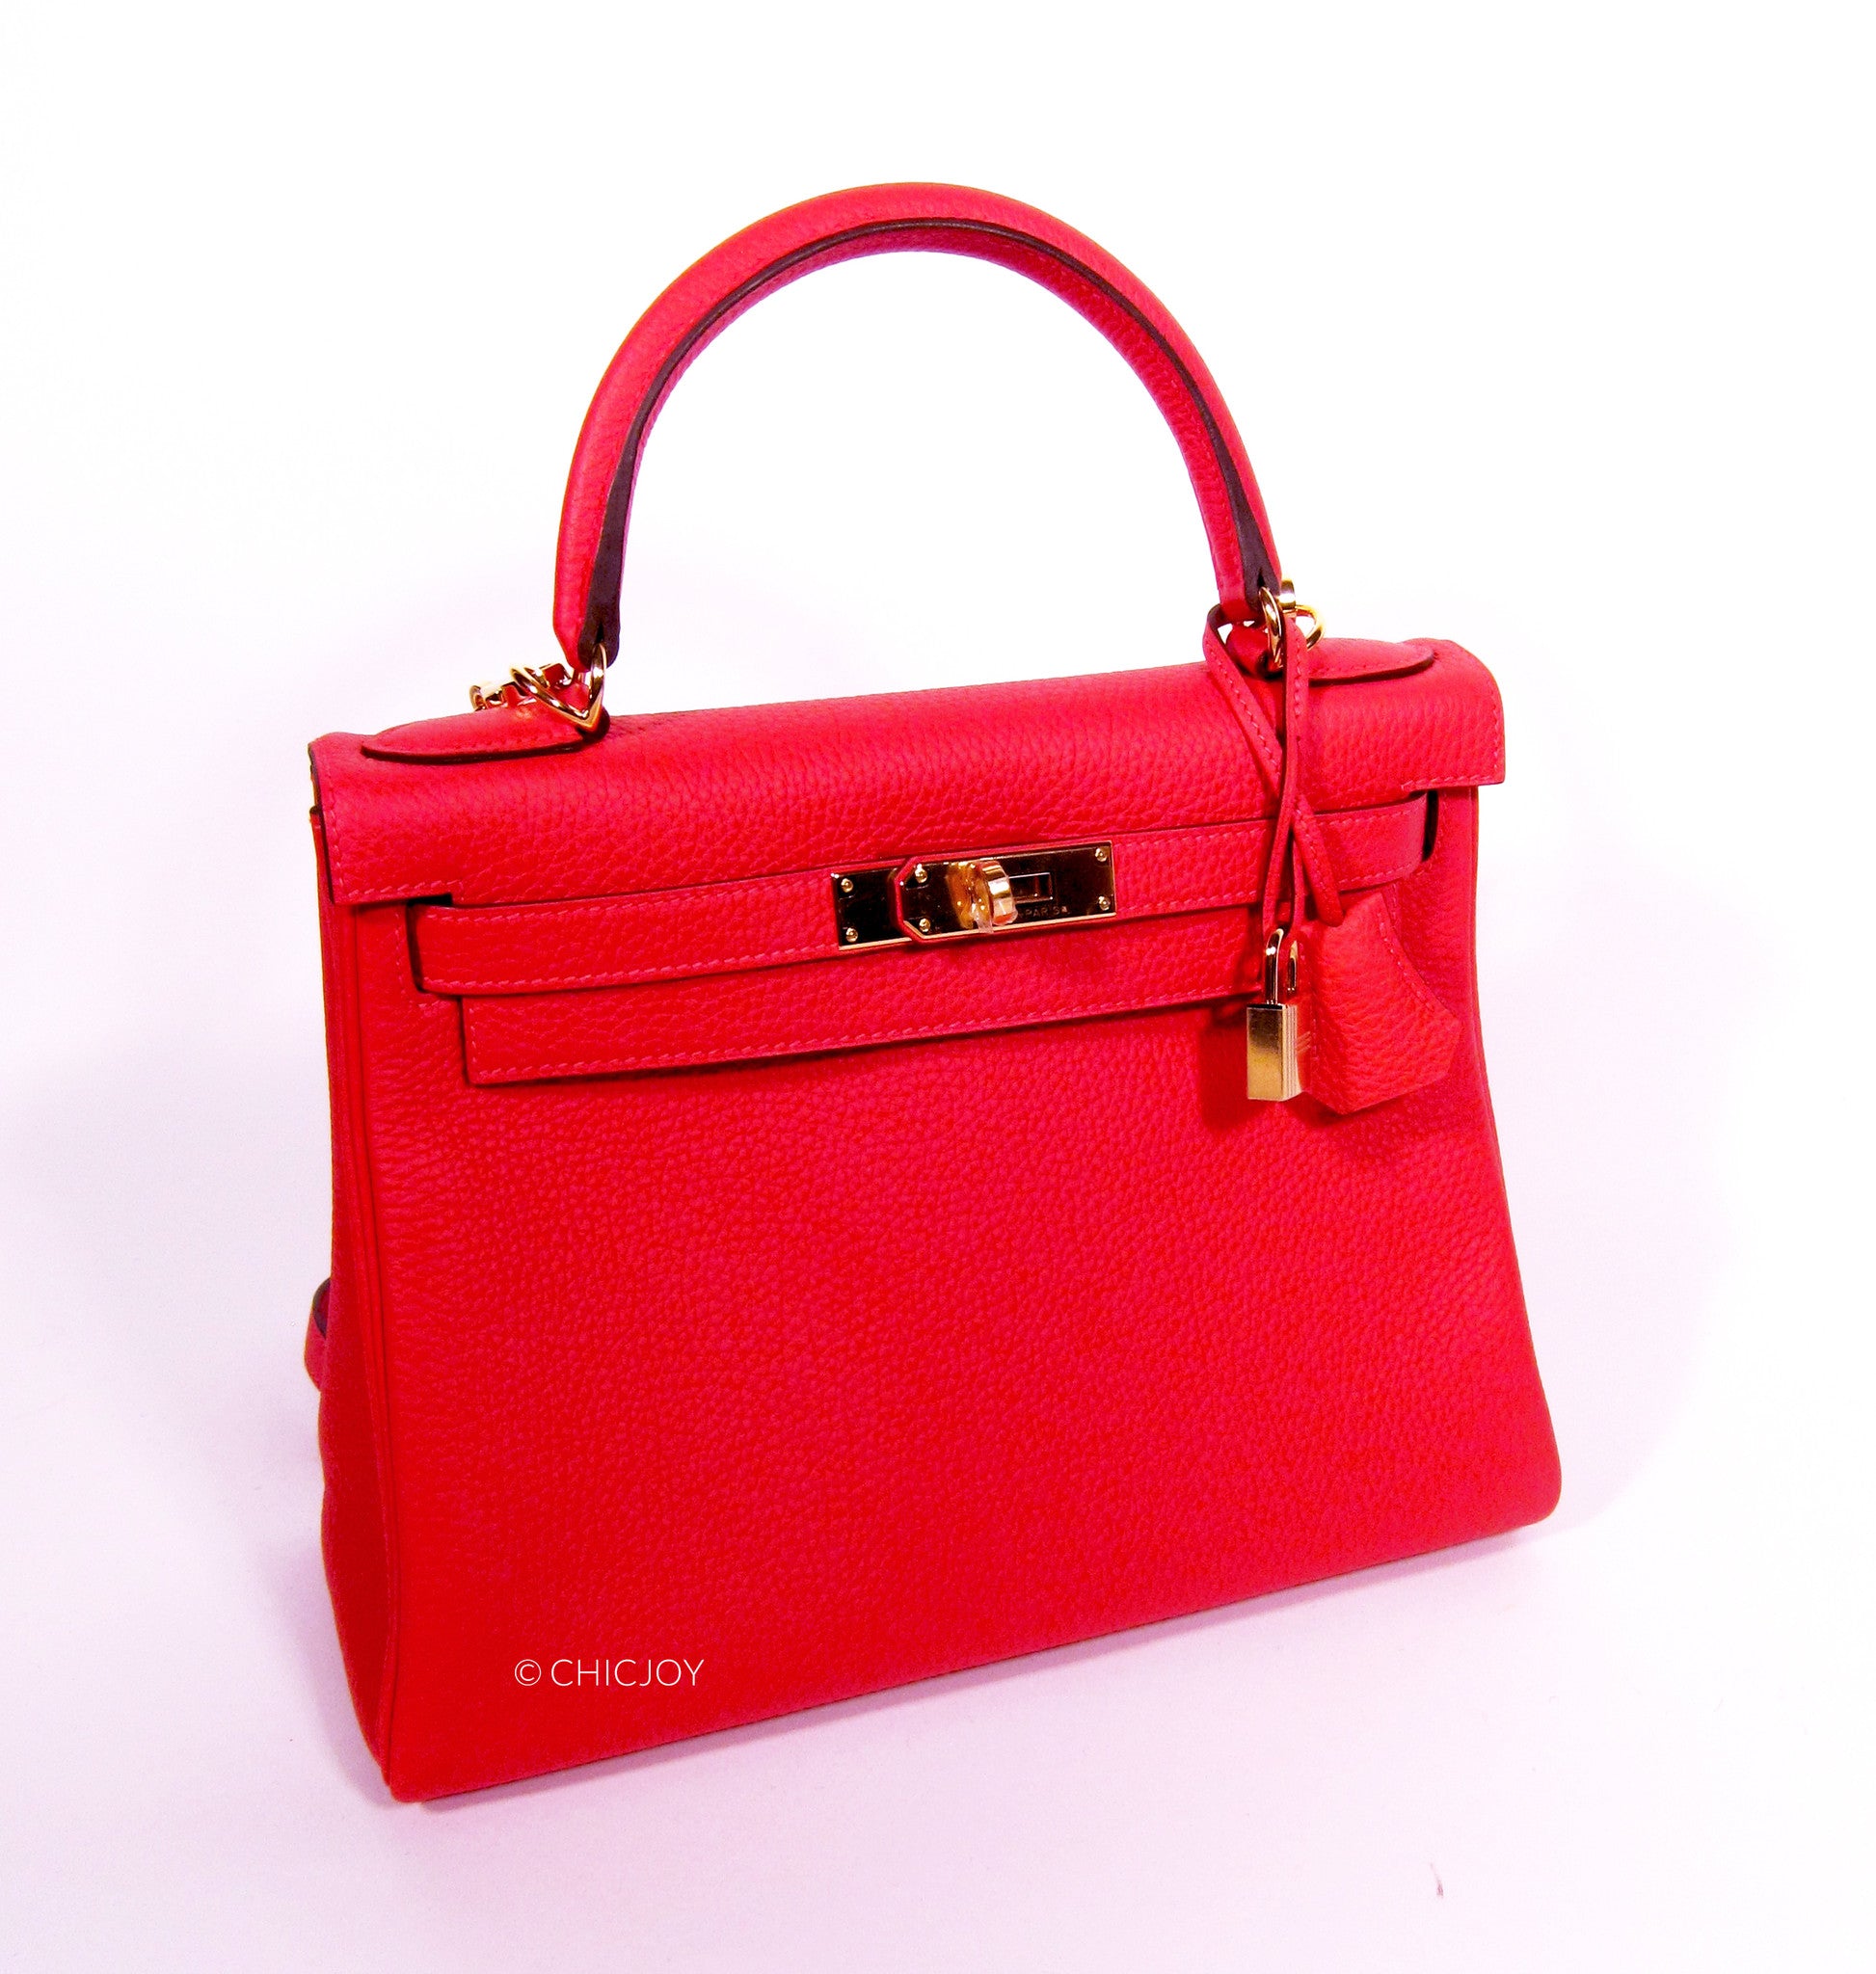 Hermes Kelly Sellier 25 Tri-Color Nata, Jaune Poussin and Sesame